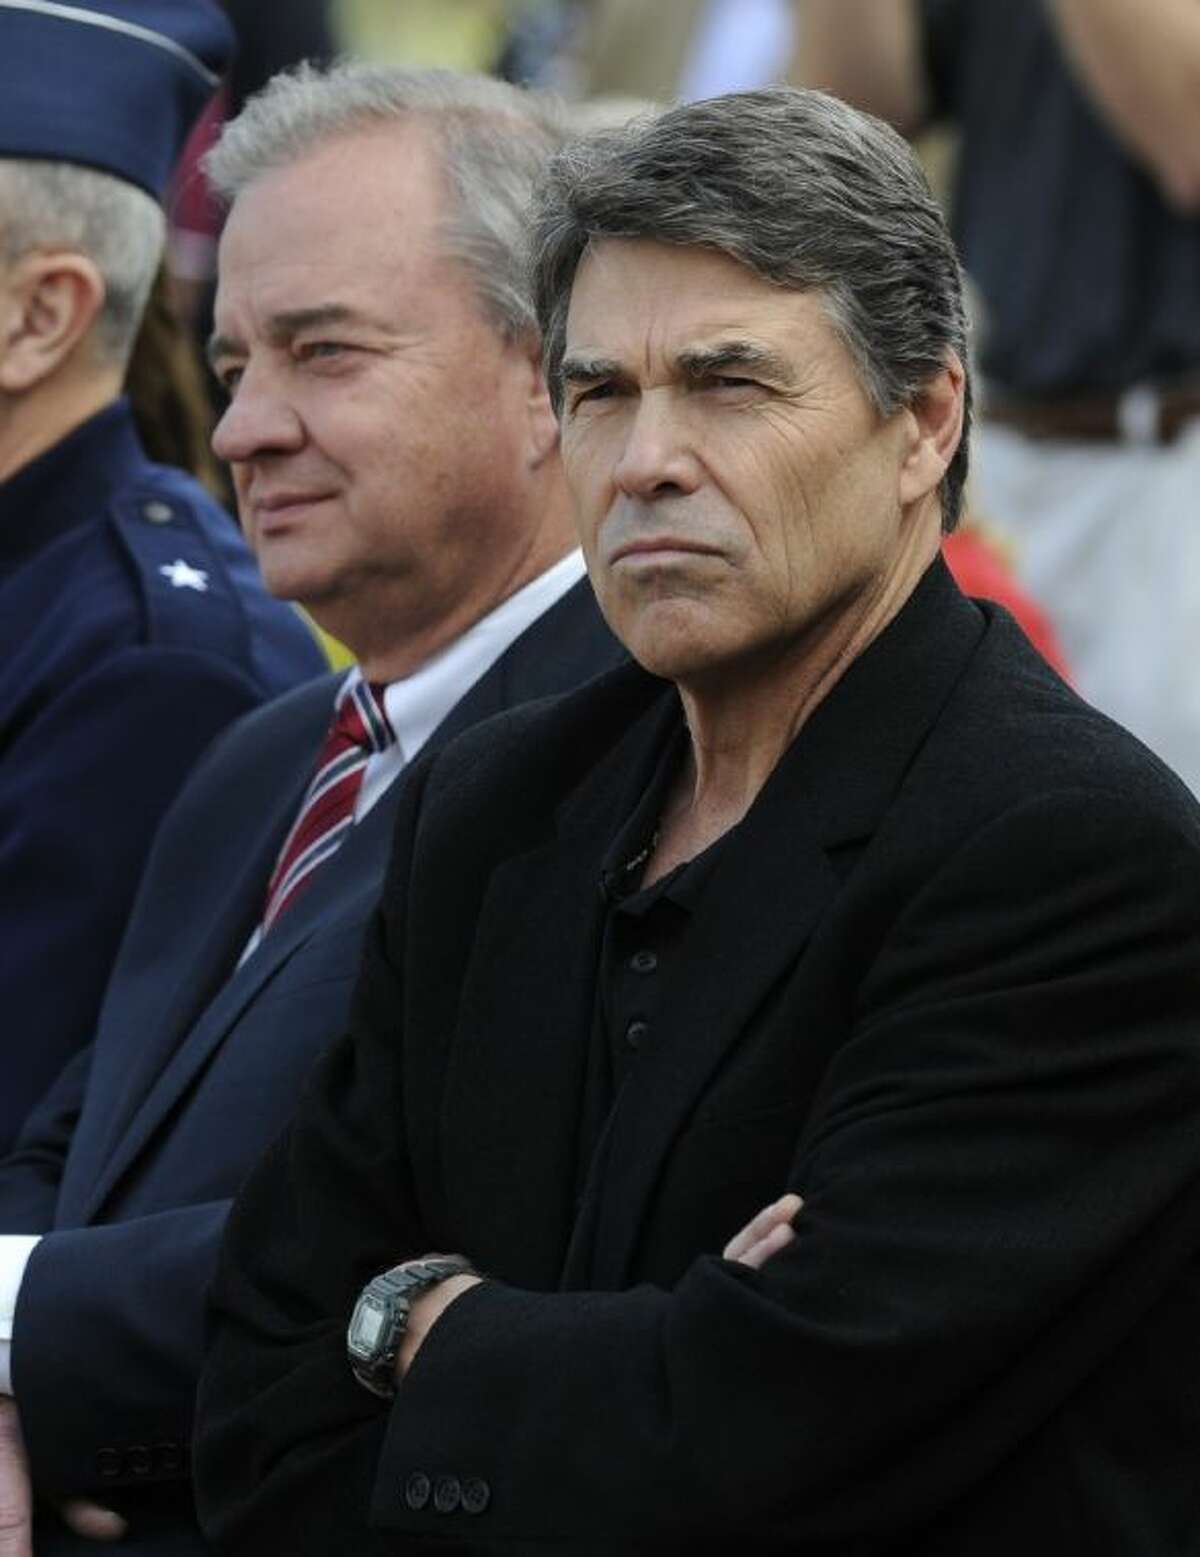 Texas Gov. Rick Perry and Texas A&M chancellor John Sharp attend ceremonies marking the reactivation of their old Corps of Cadets squadron last week in College Station. Perry spoke out against President Obama’s plan to curb gun violence Wednesday.